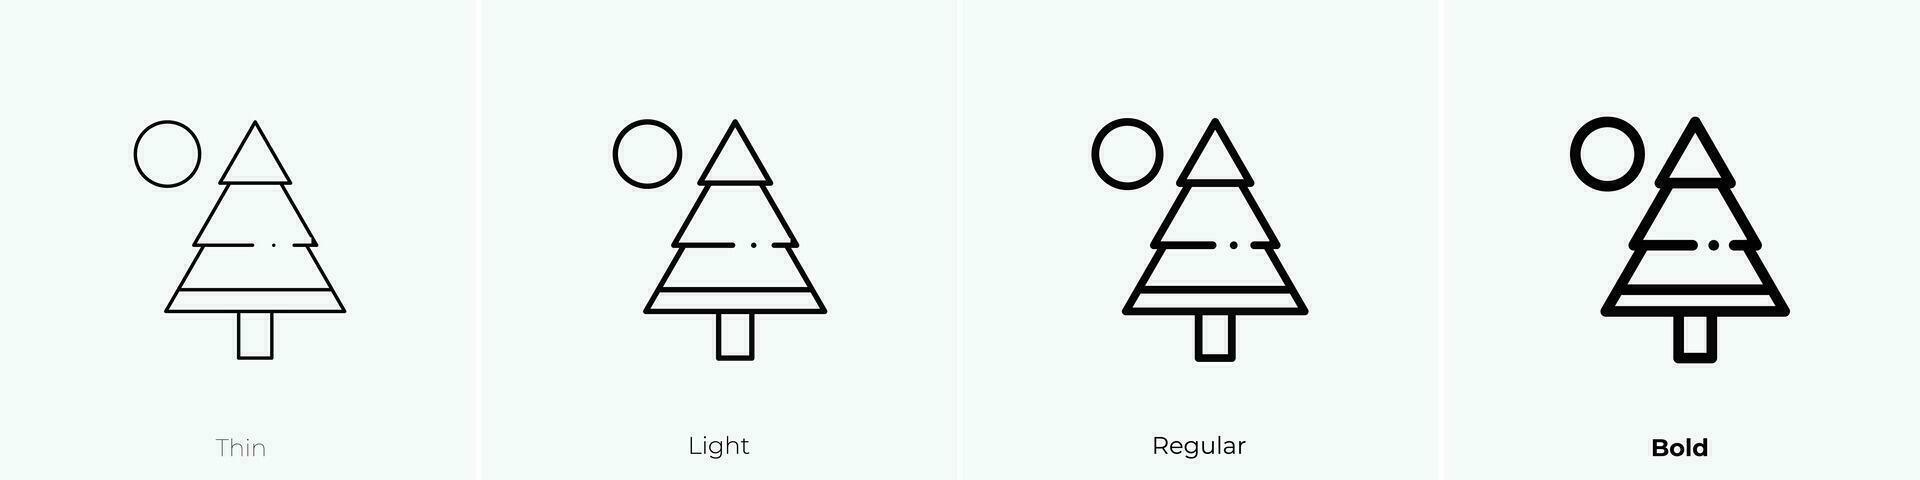 pine icon. Thin, Light, Regular And Bold style design isolated on white background vector